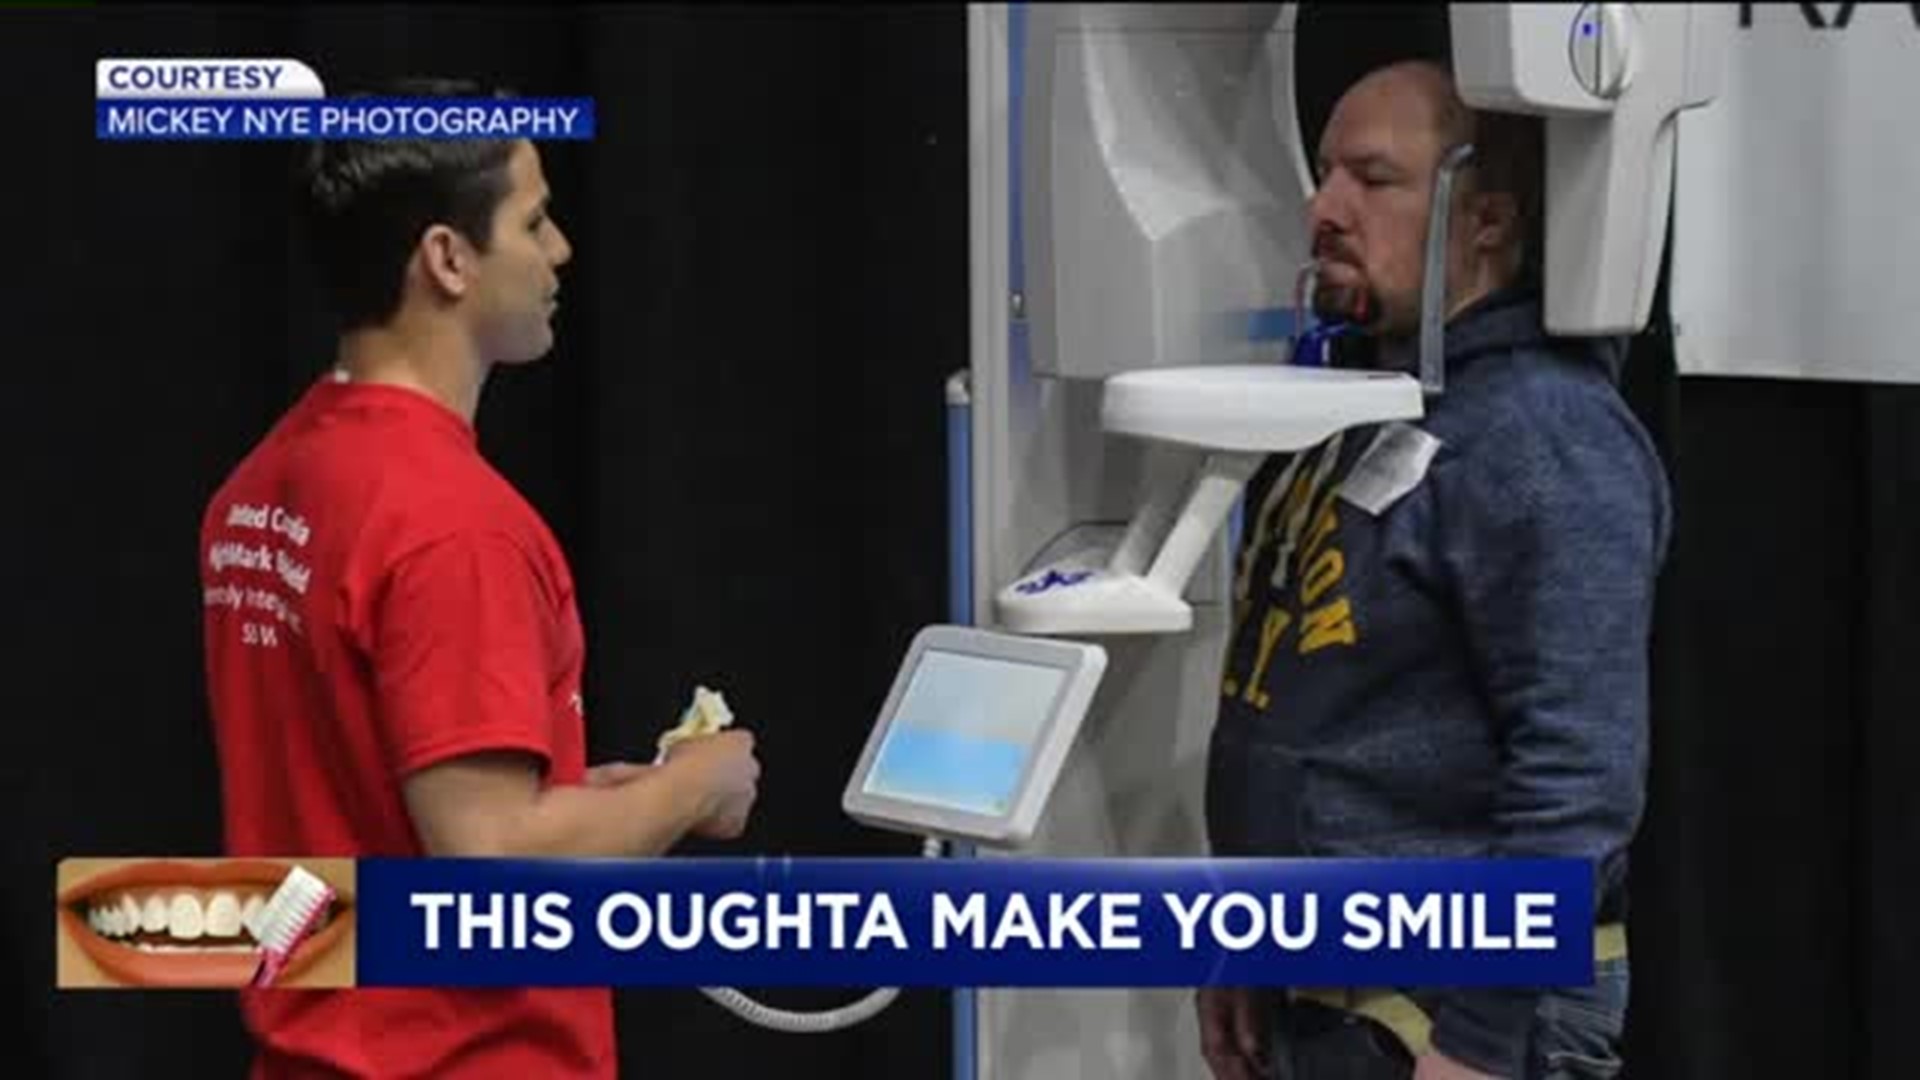 Free Dental Working Coming to Wilkes-Barre Area